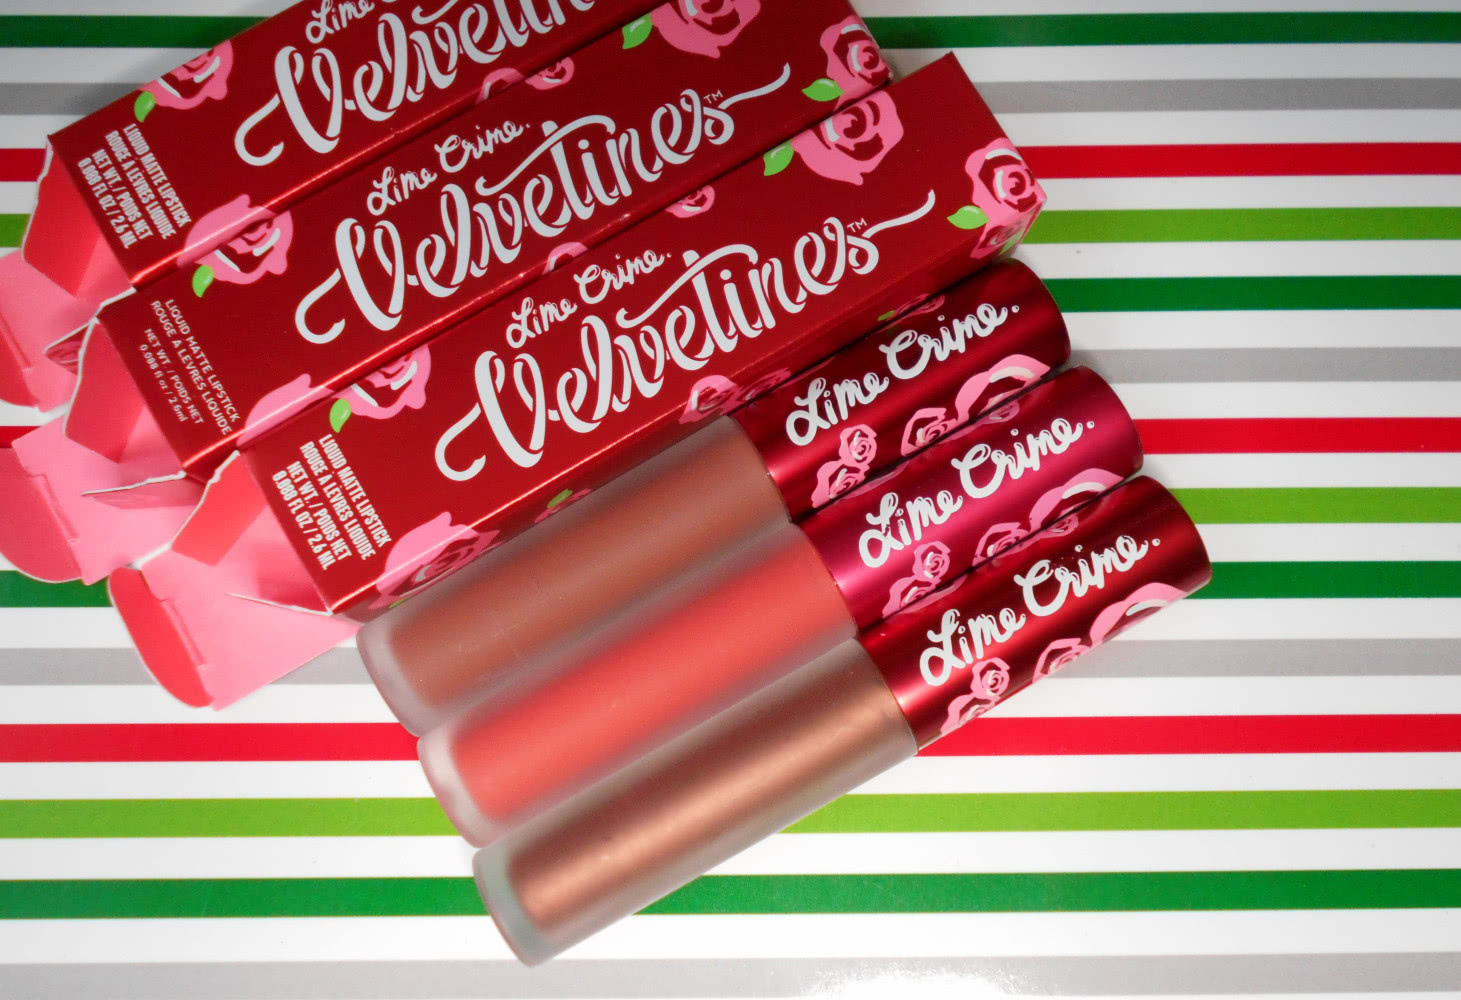 Lime Crime Velvetines (Suedeberry, Lana, Cindy)